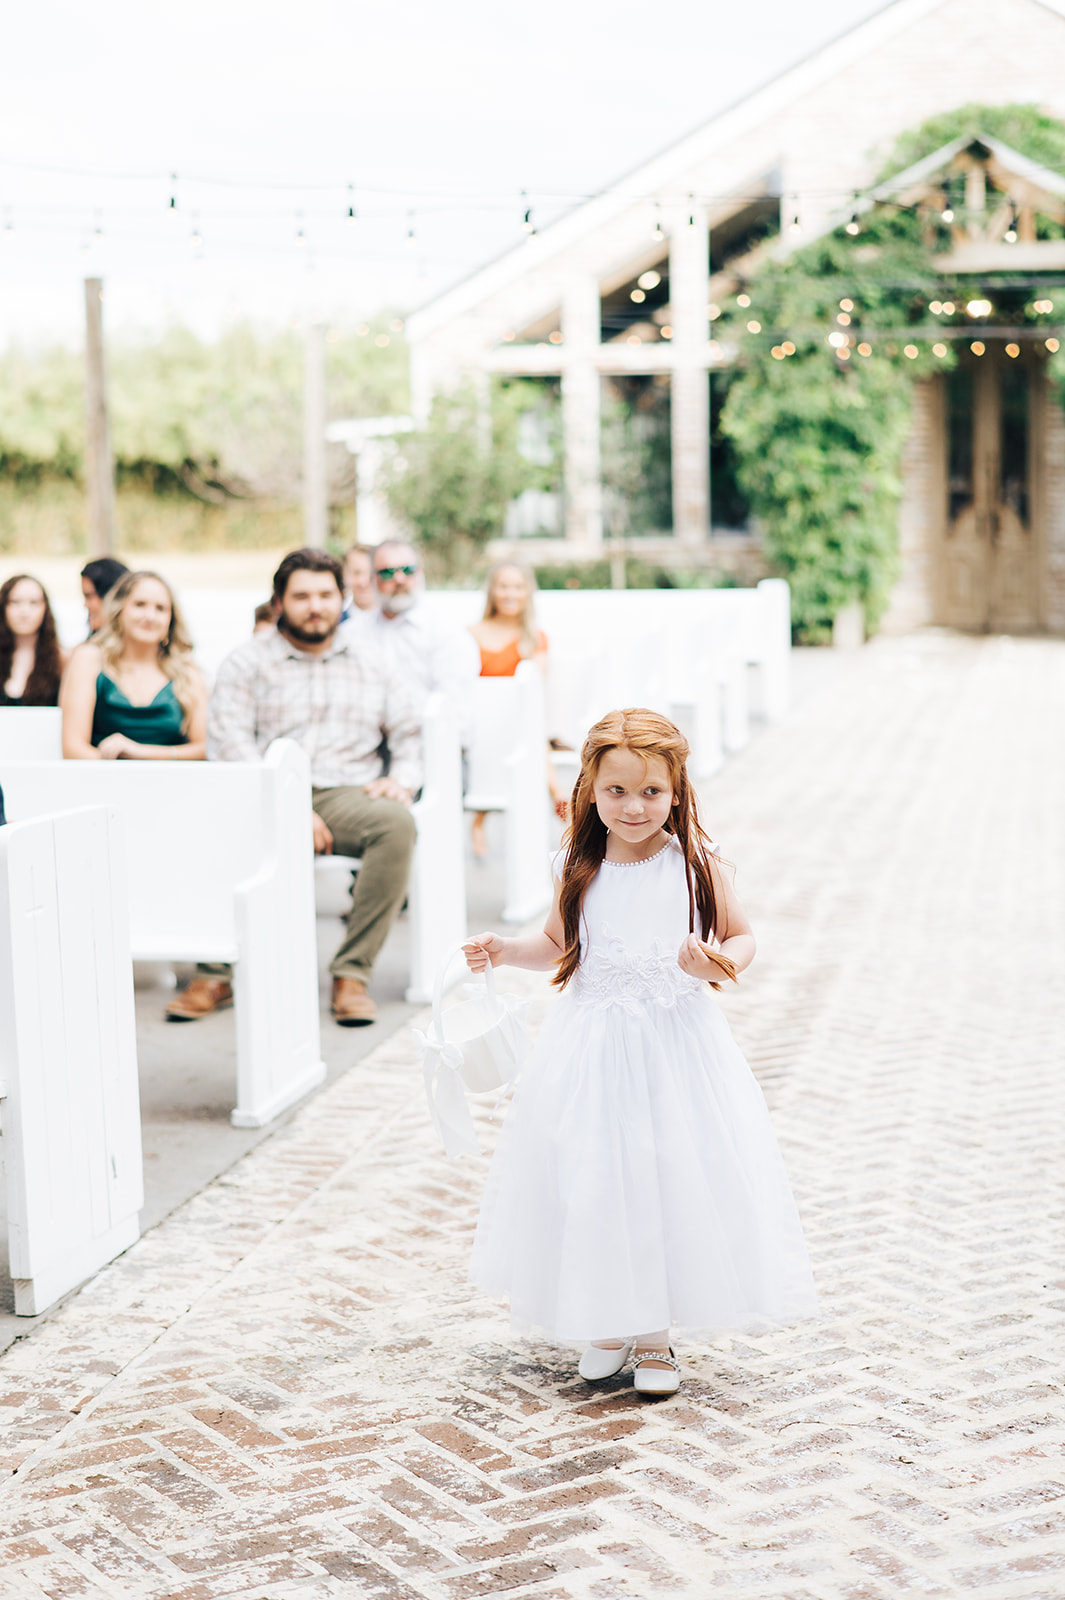 October Wedding at The Greenery in Amite, Louisiana. Photographed by Taylor Hubbs Photography, a Baton Rouge Wedding Pho